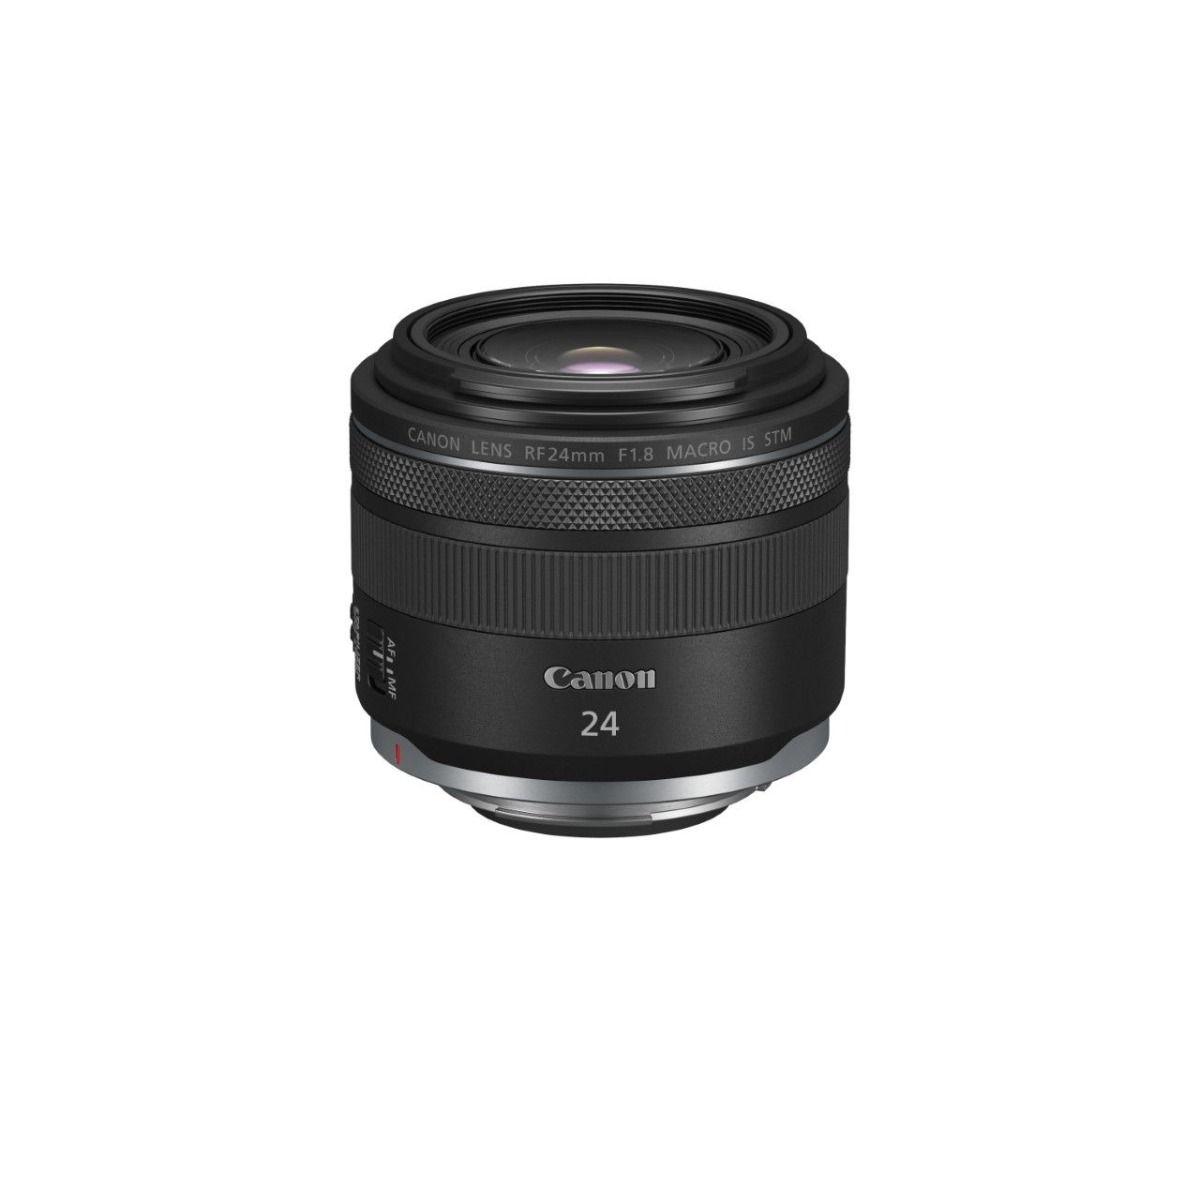 Product Image of Canon RF 24mm F1.8 MACRO IS STM Lens